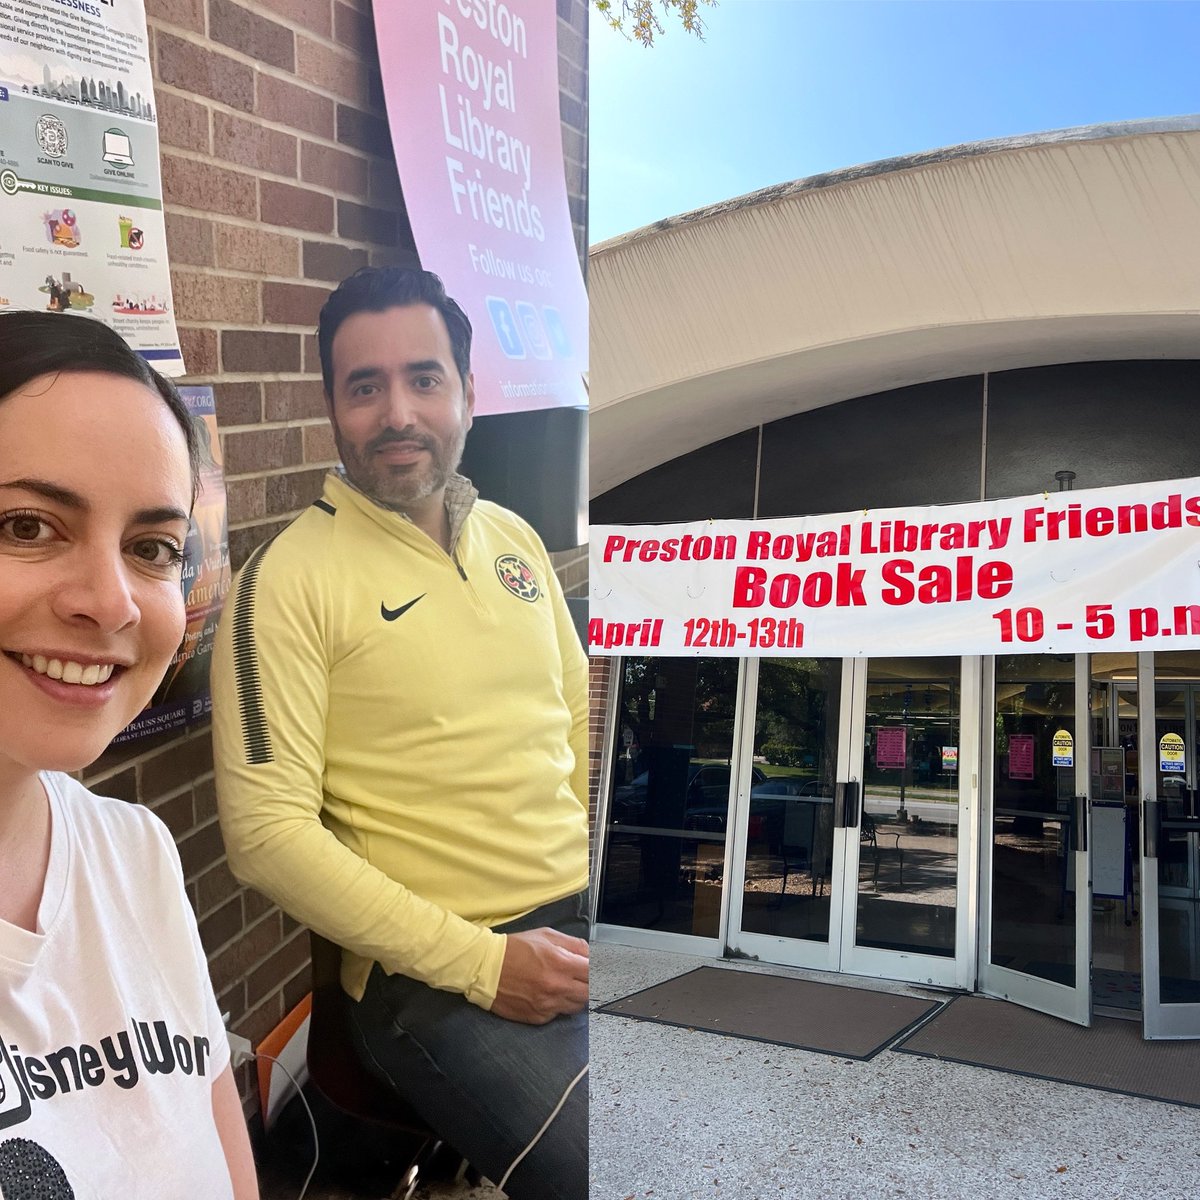 Volunteering at the local library today. Come visit us at the Preston Royal Library Book Sale until 5 PM! Can’t beat $1 paperback books. #VolunteeringSaturday Starting at noon, fill a bag with books and it’s only $10!